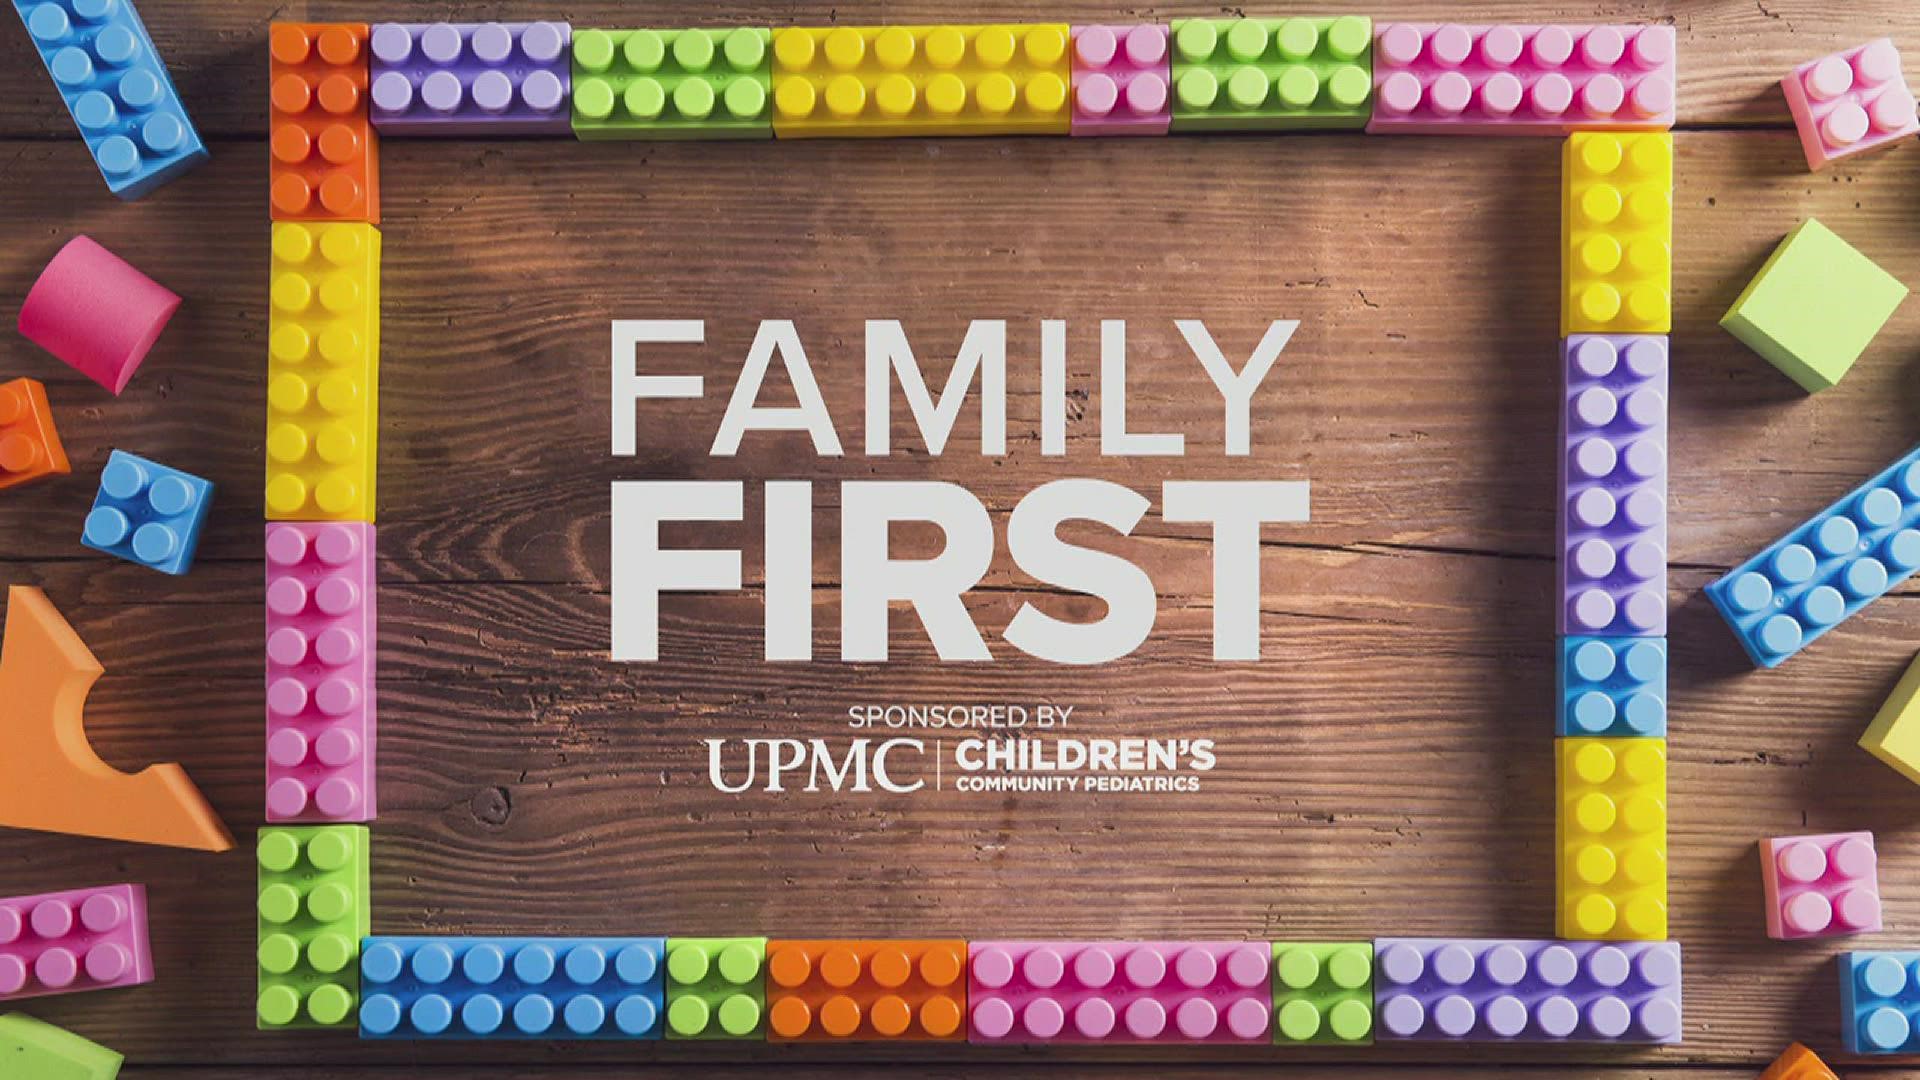 When it comes to a healthy 2023, Dr. Cynthia Elsner, the lead physician at UPMC Children’s Community Pediatrics, says to make it a family affair.